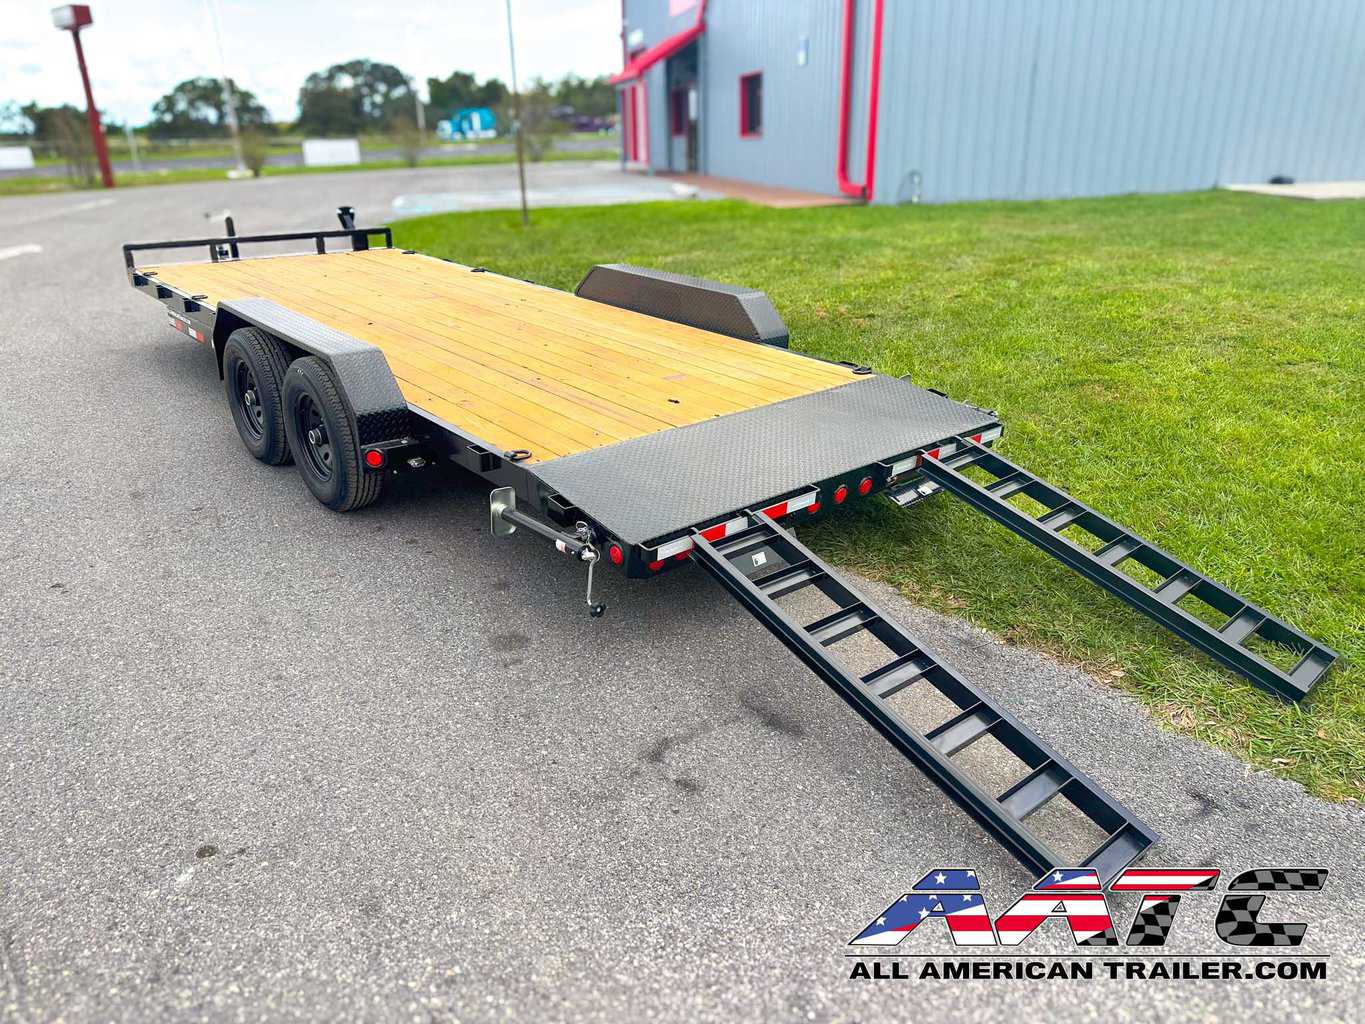 A PJ 20-foot car hauler trailer, model CE-202-SIR, designed for versatile vehicle transportation. This PJ Trailer features a 2-foot dovetail with 5-foot slide-in ramps, making it easy to load and unload vehicles. With a 10,000 GVWR, electric brakes, and a black finish, it's a durable and efficient choice for car hauling with a load capacity of 7500 lbs. The bumper pull design allows for convenient towing